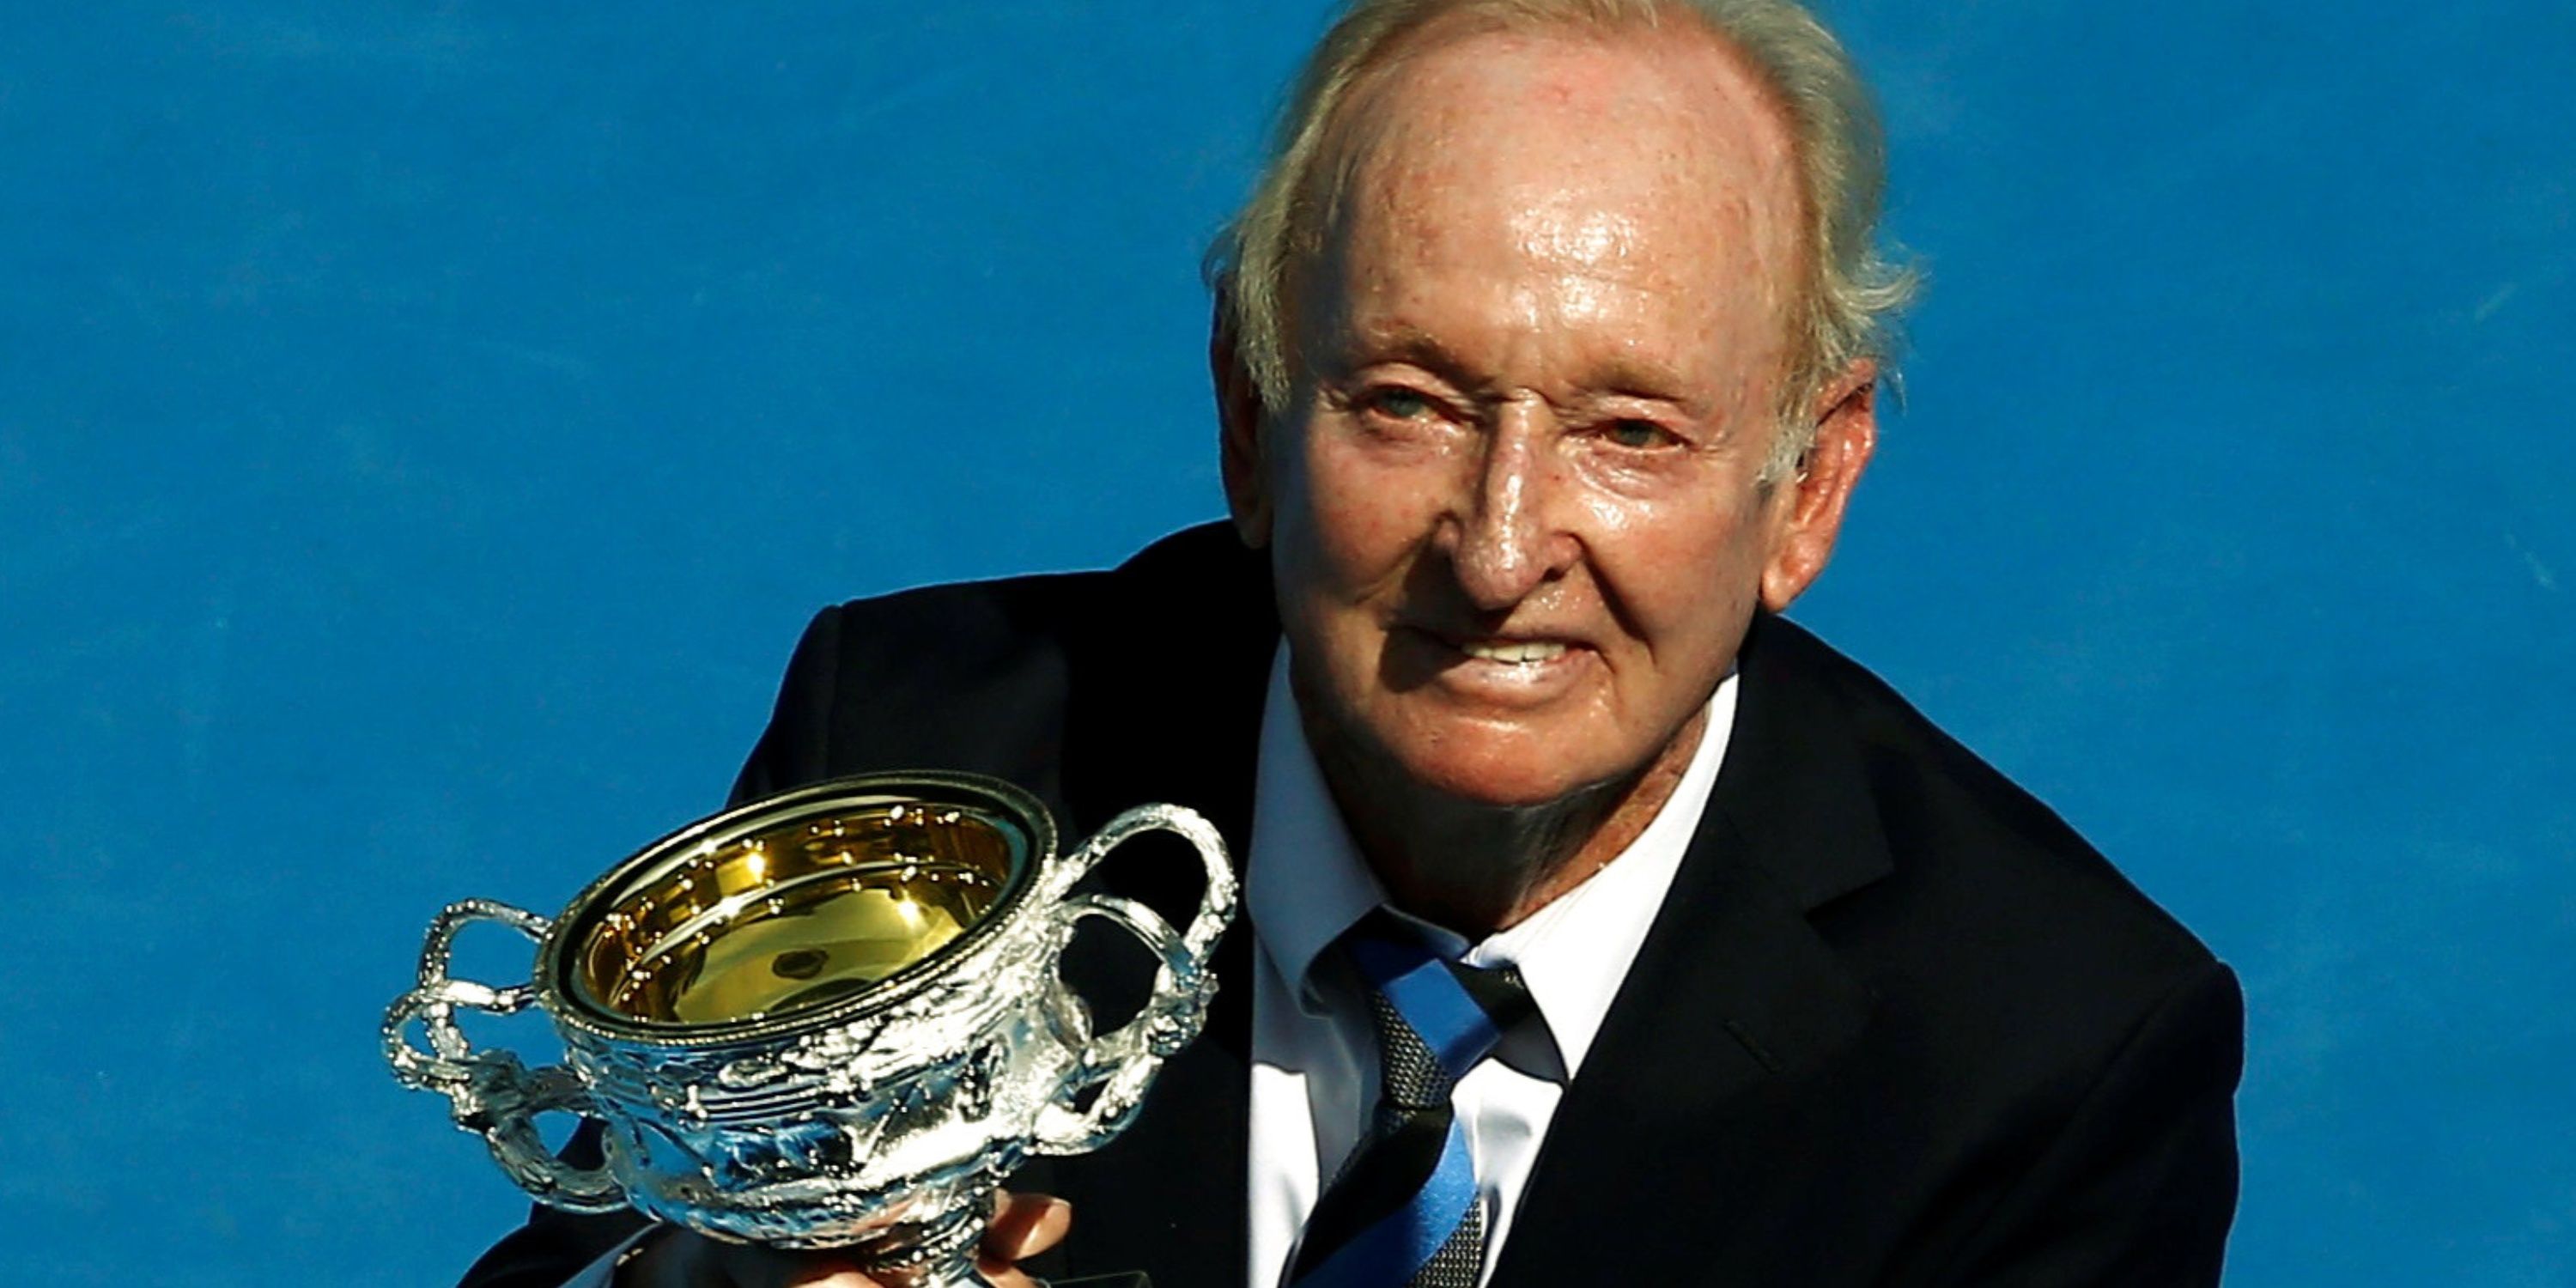 Former Australian tennis player Rod Laver holds a trophy presented to him.